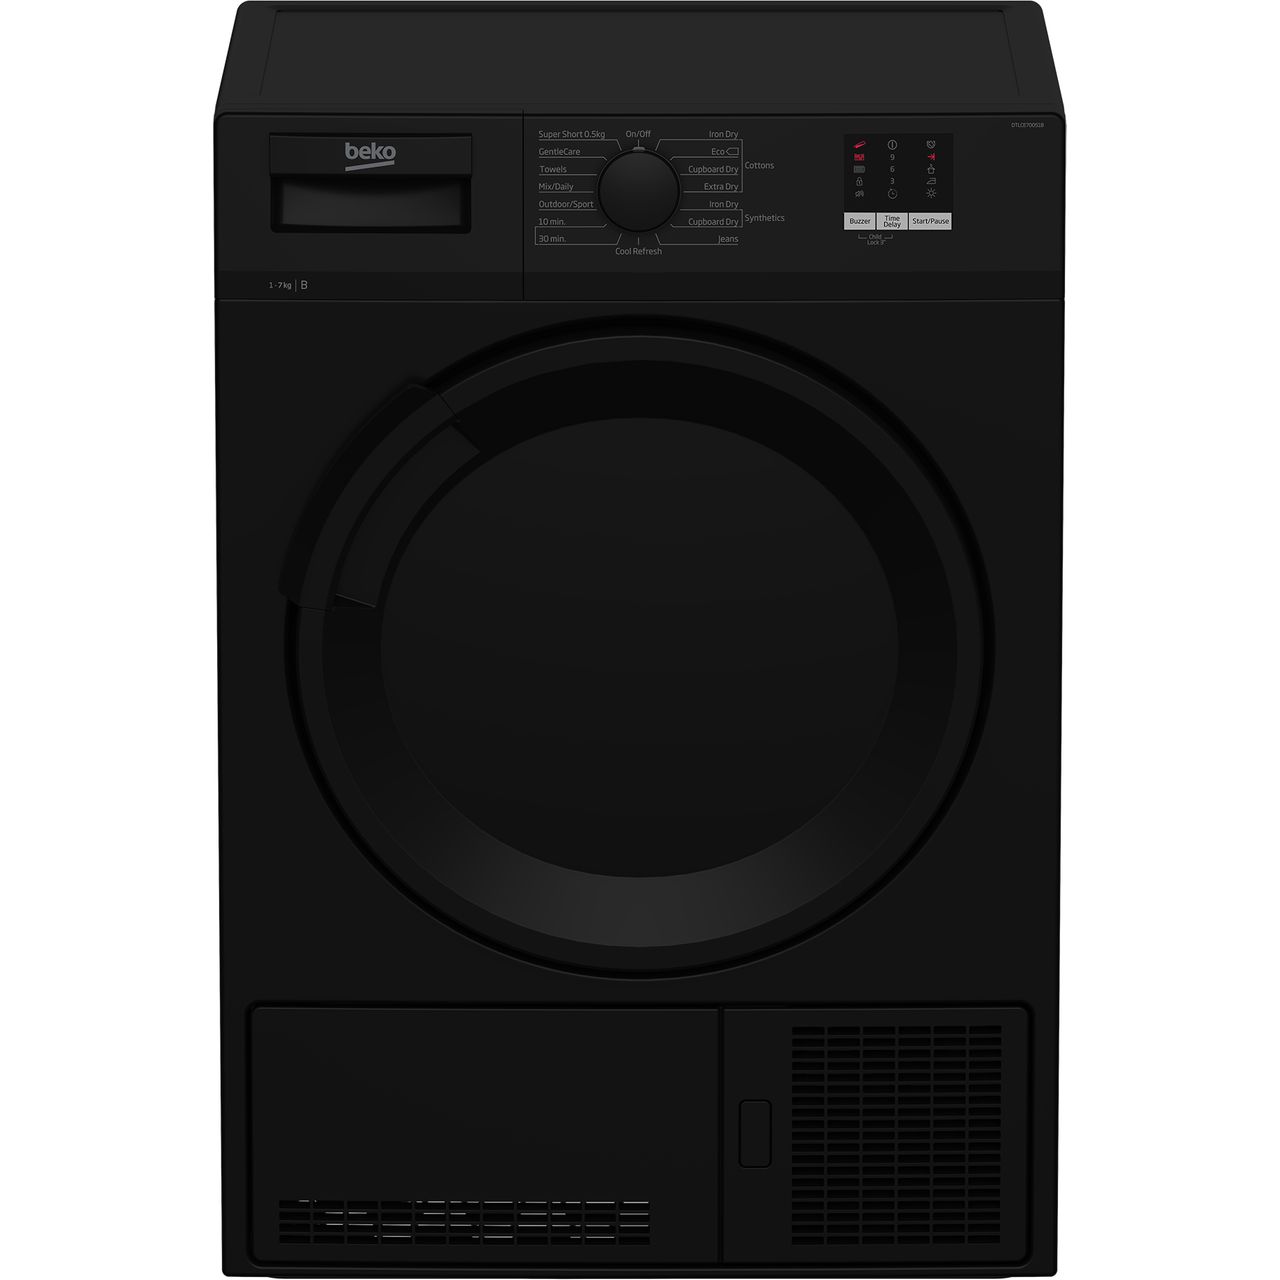 Beko DTLCE70051B 7Kg Condenser Tumble Dryer Review